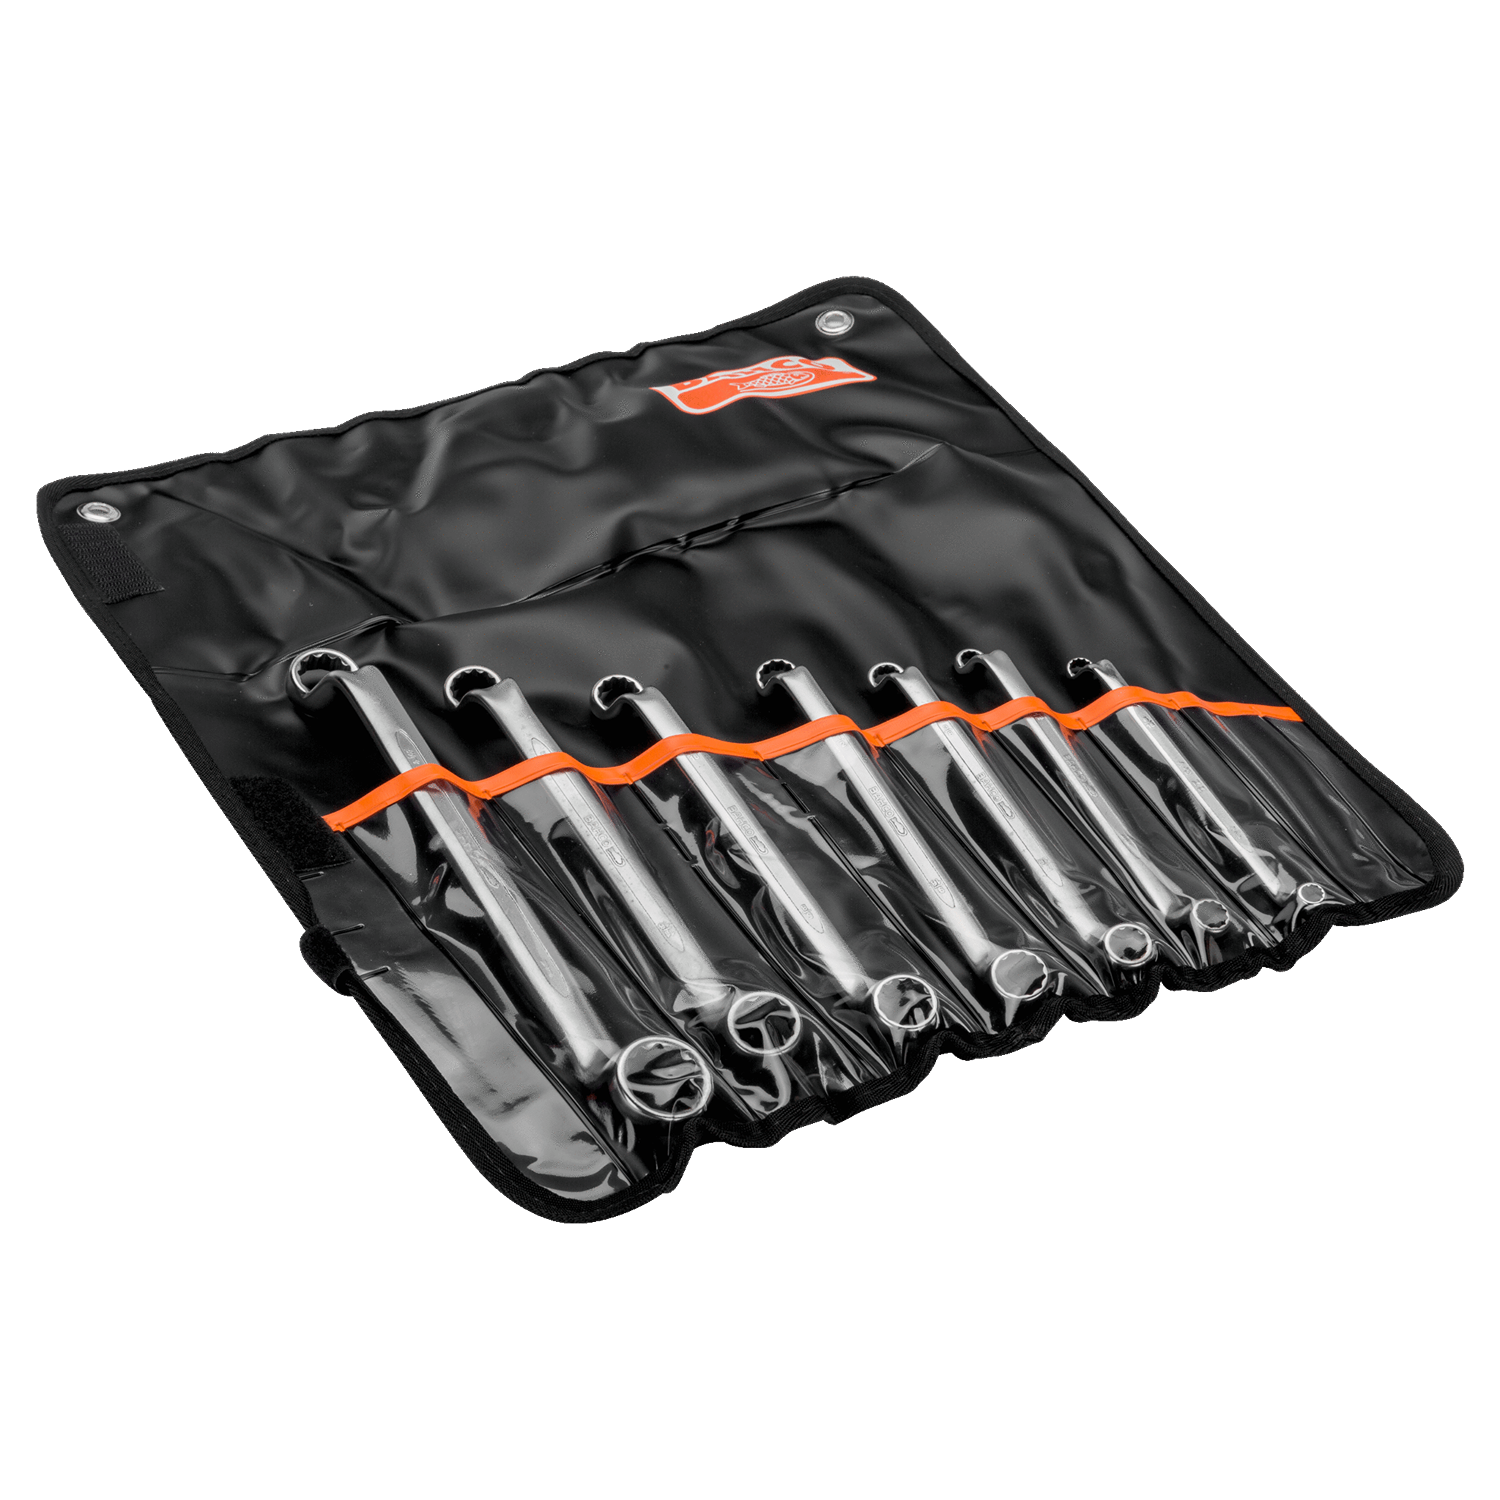 BAHCO 2Z/7T Imperial Deep Offset Double Ring Ended Wrench Set - Premium Offset Double Ring Ended Wrench Set from BAHCO - Shop now at Yew Aik.